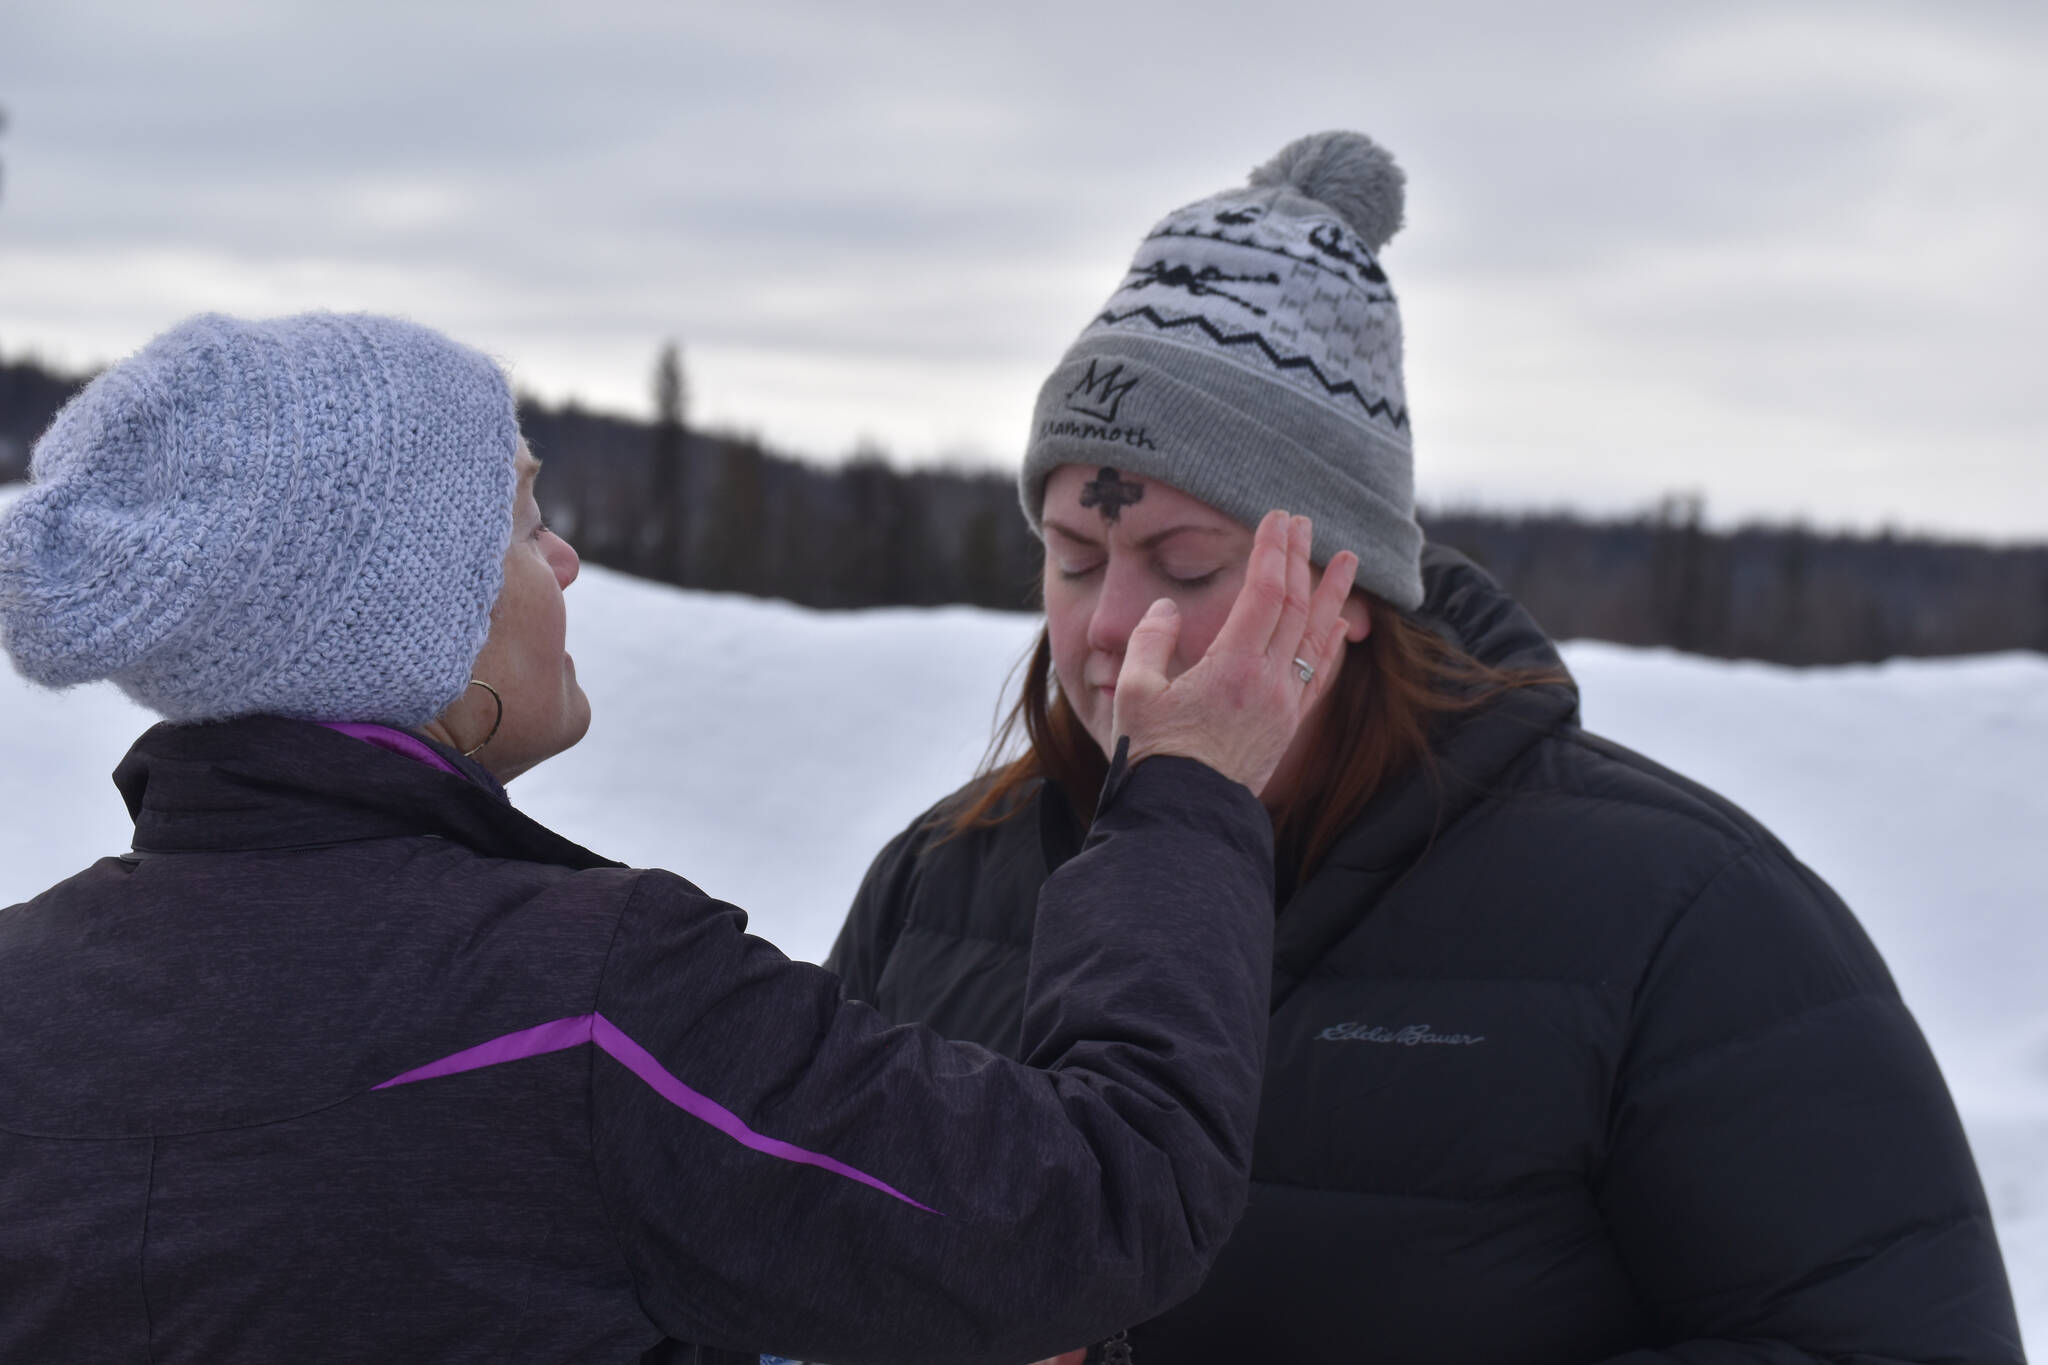 Pastor Karen Martin Tichenor applies ashes to Pastor Meredith Harber’s forehead as they prepare for Ashes to Go! on Wednesday; Feb. 22; 2023 at Soldotna Creek Park in Soldotna; Alaska. (Jake Dye/Peninsula Clarion)